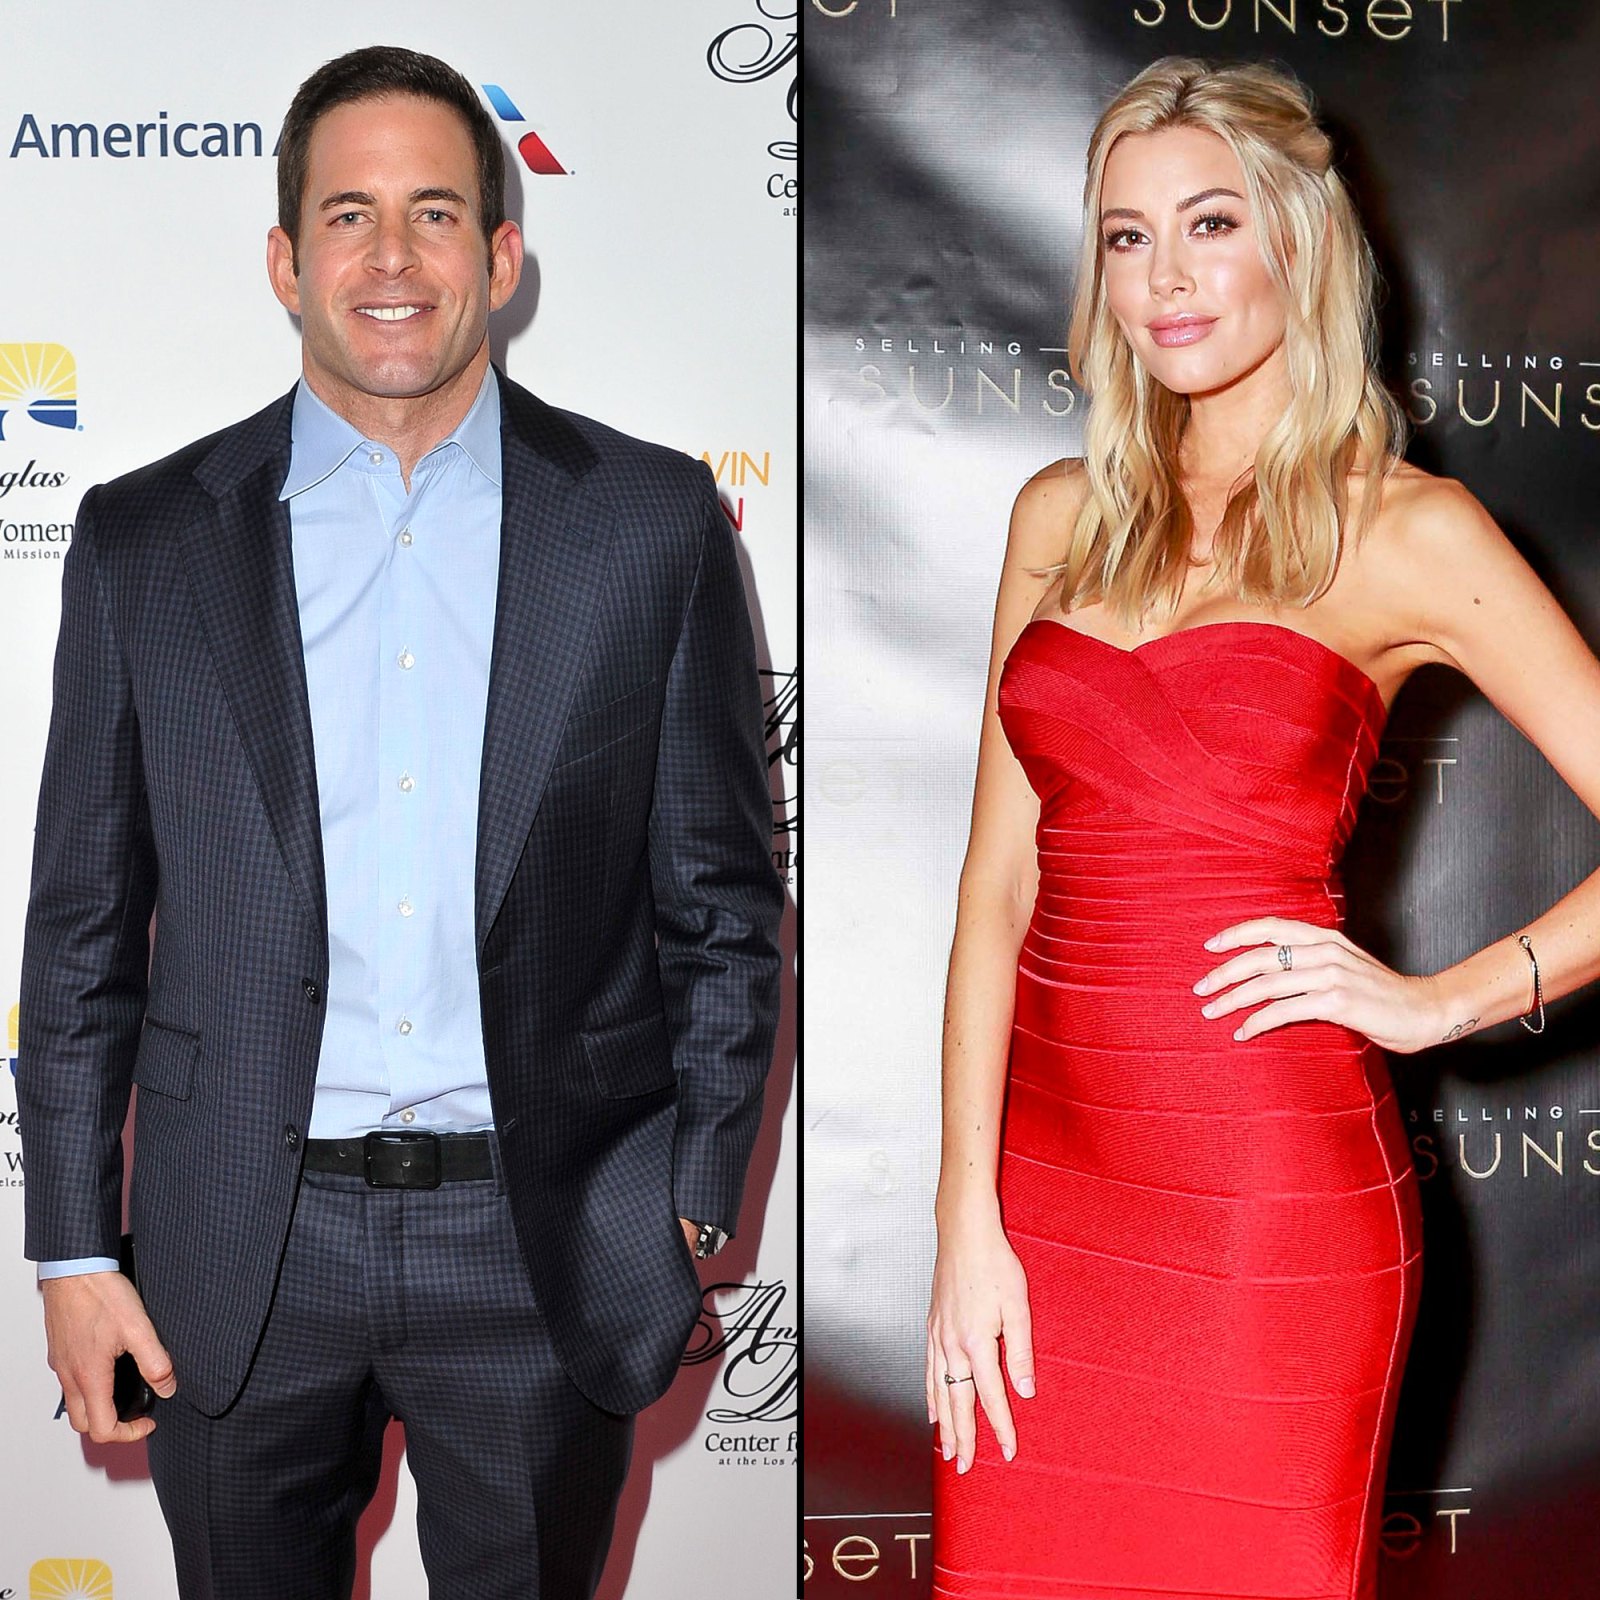 Tarek El Moussa Is ‘very Into Selling Sunsets Heather Rae Young Us Weekly